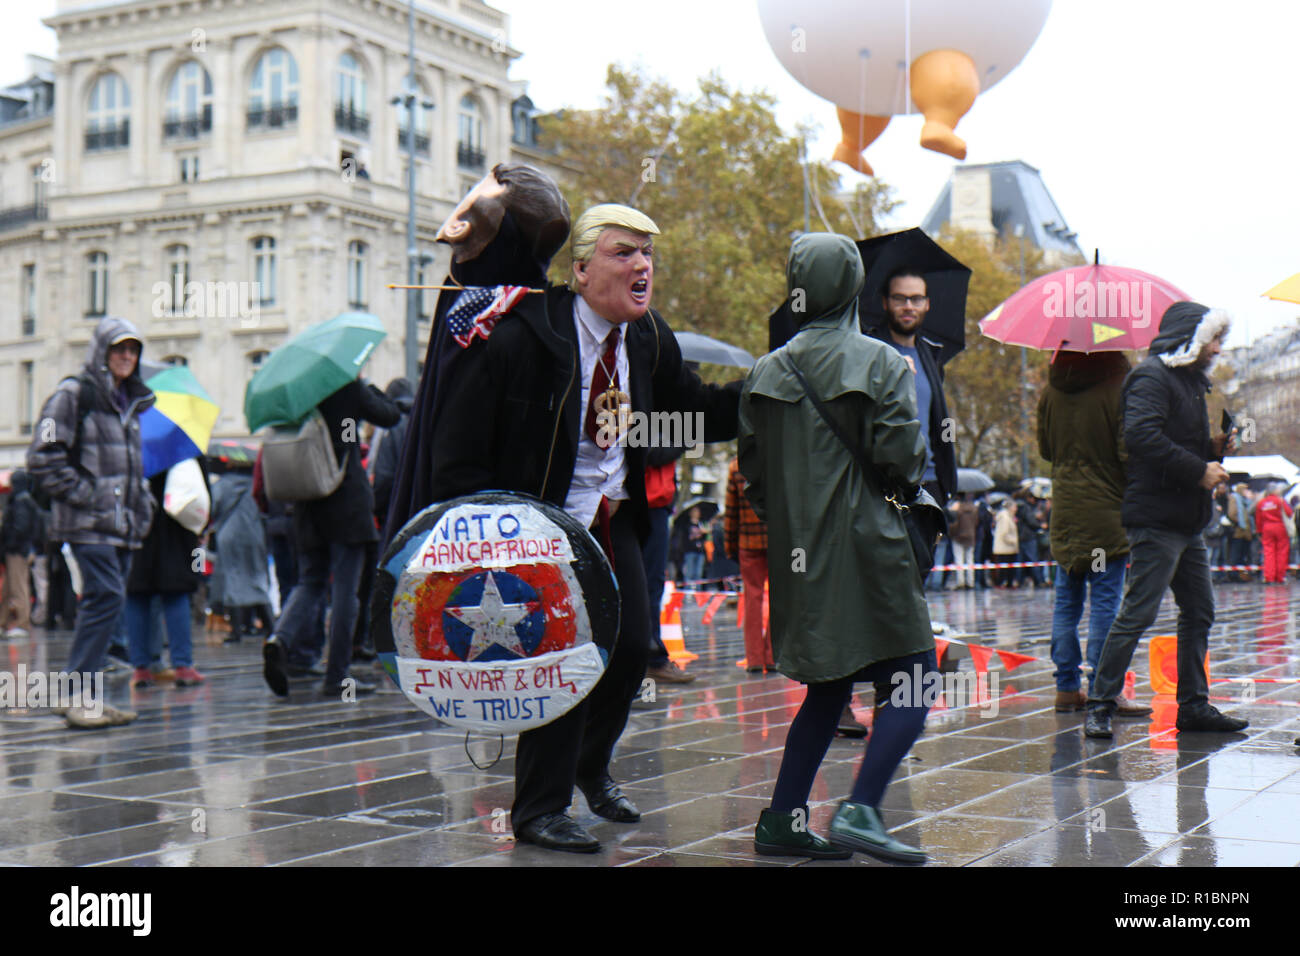 Paris, France. 11th Nov 2018.- A demonstrator in a Trump mask engages with others at Place de la République in Paris during an anti-Trump demonstration. Credit: Justin Johnson/Alamy Live News Stock Photo